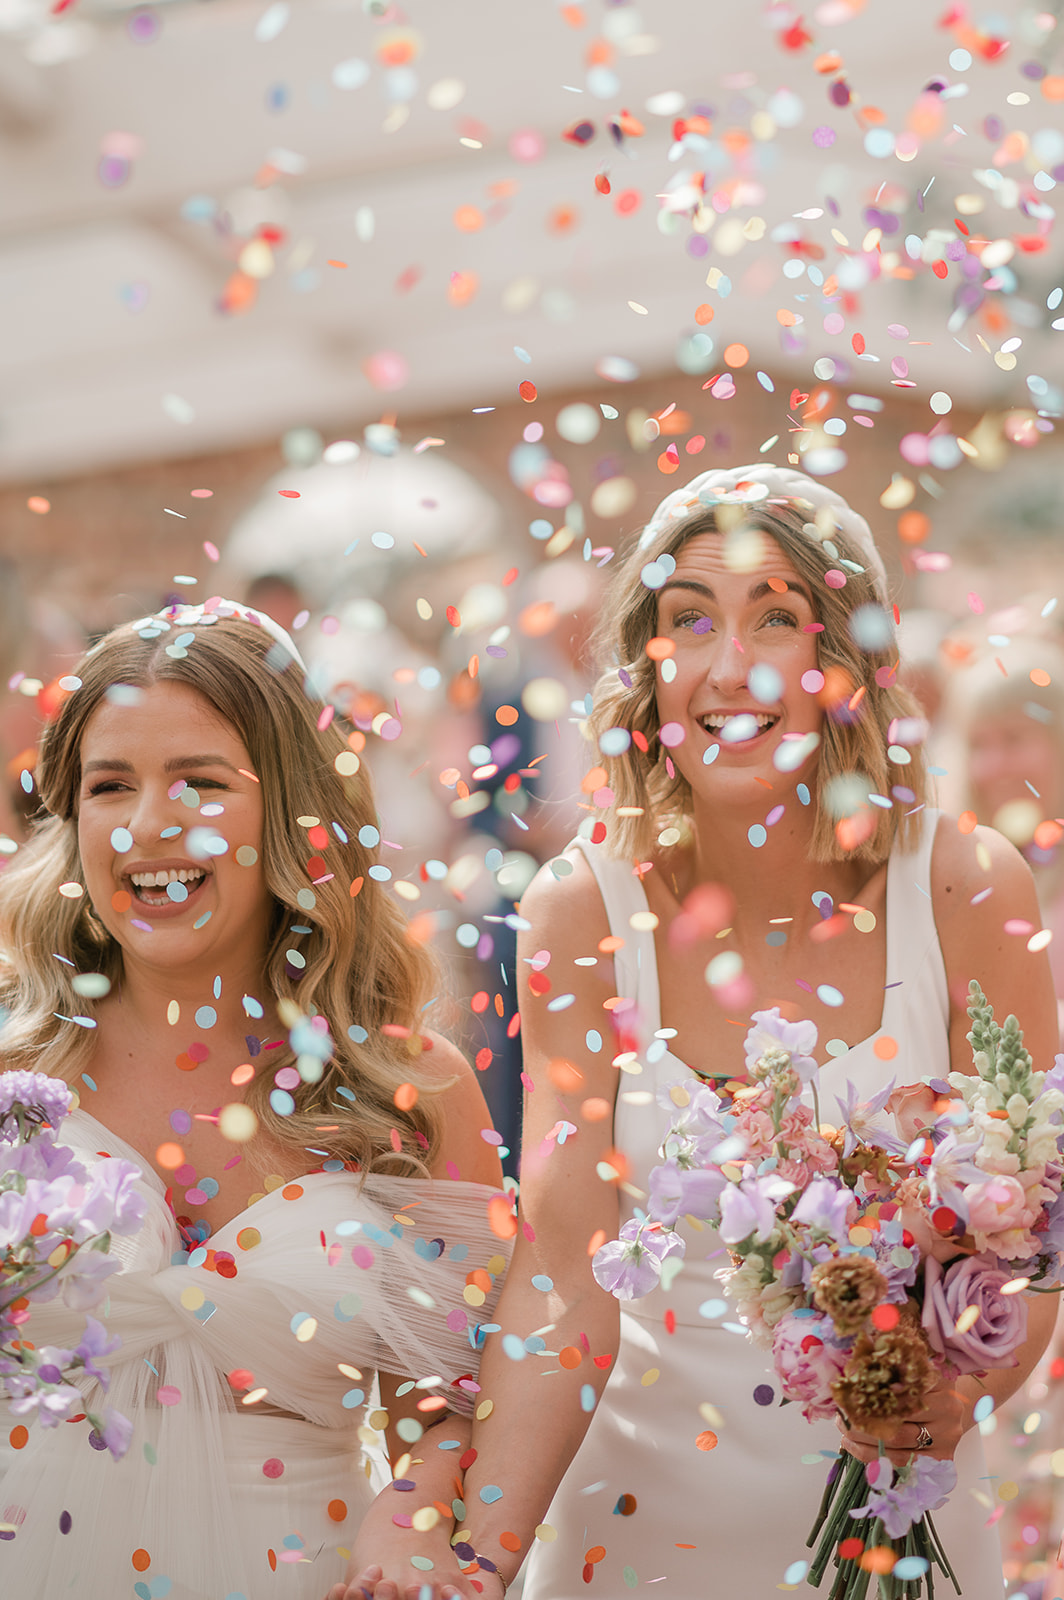 Radiant moment: Just-married brides, guided by celebrant Olivia, walk down the aisle, confetti showering their beaming faces with joy.